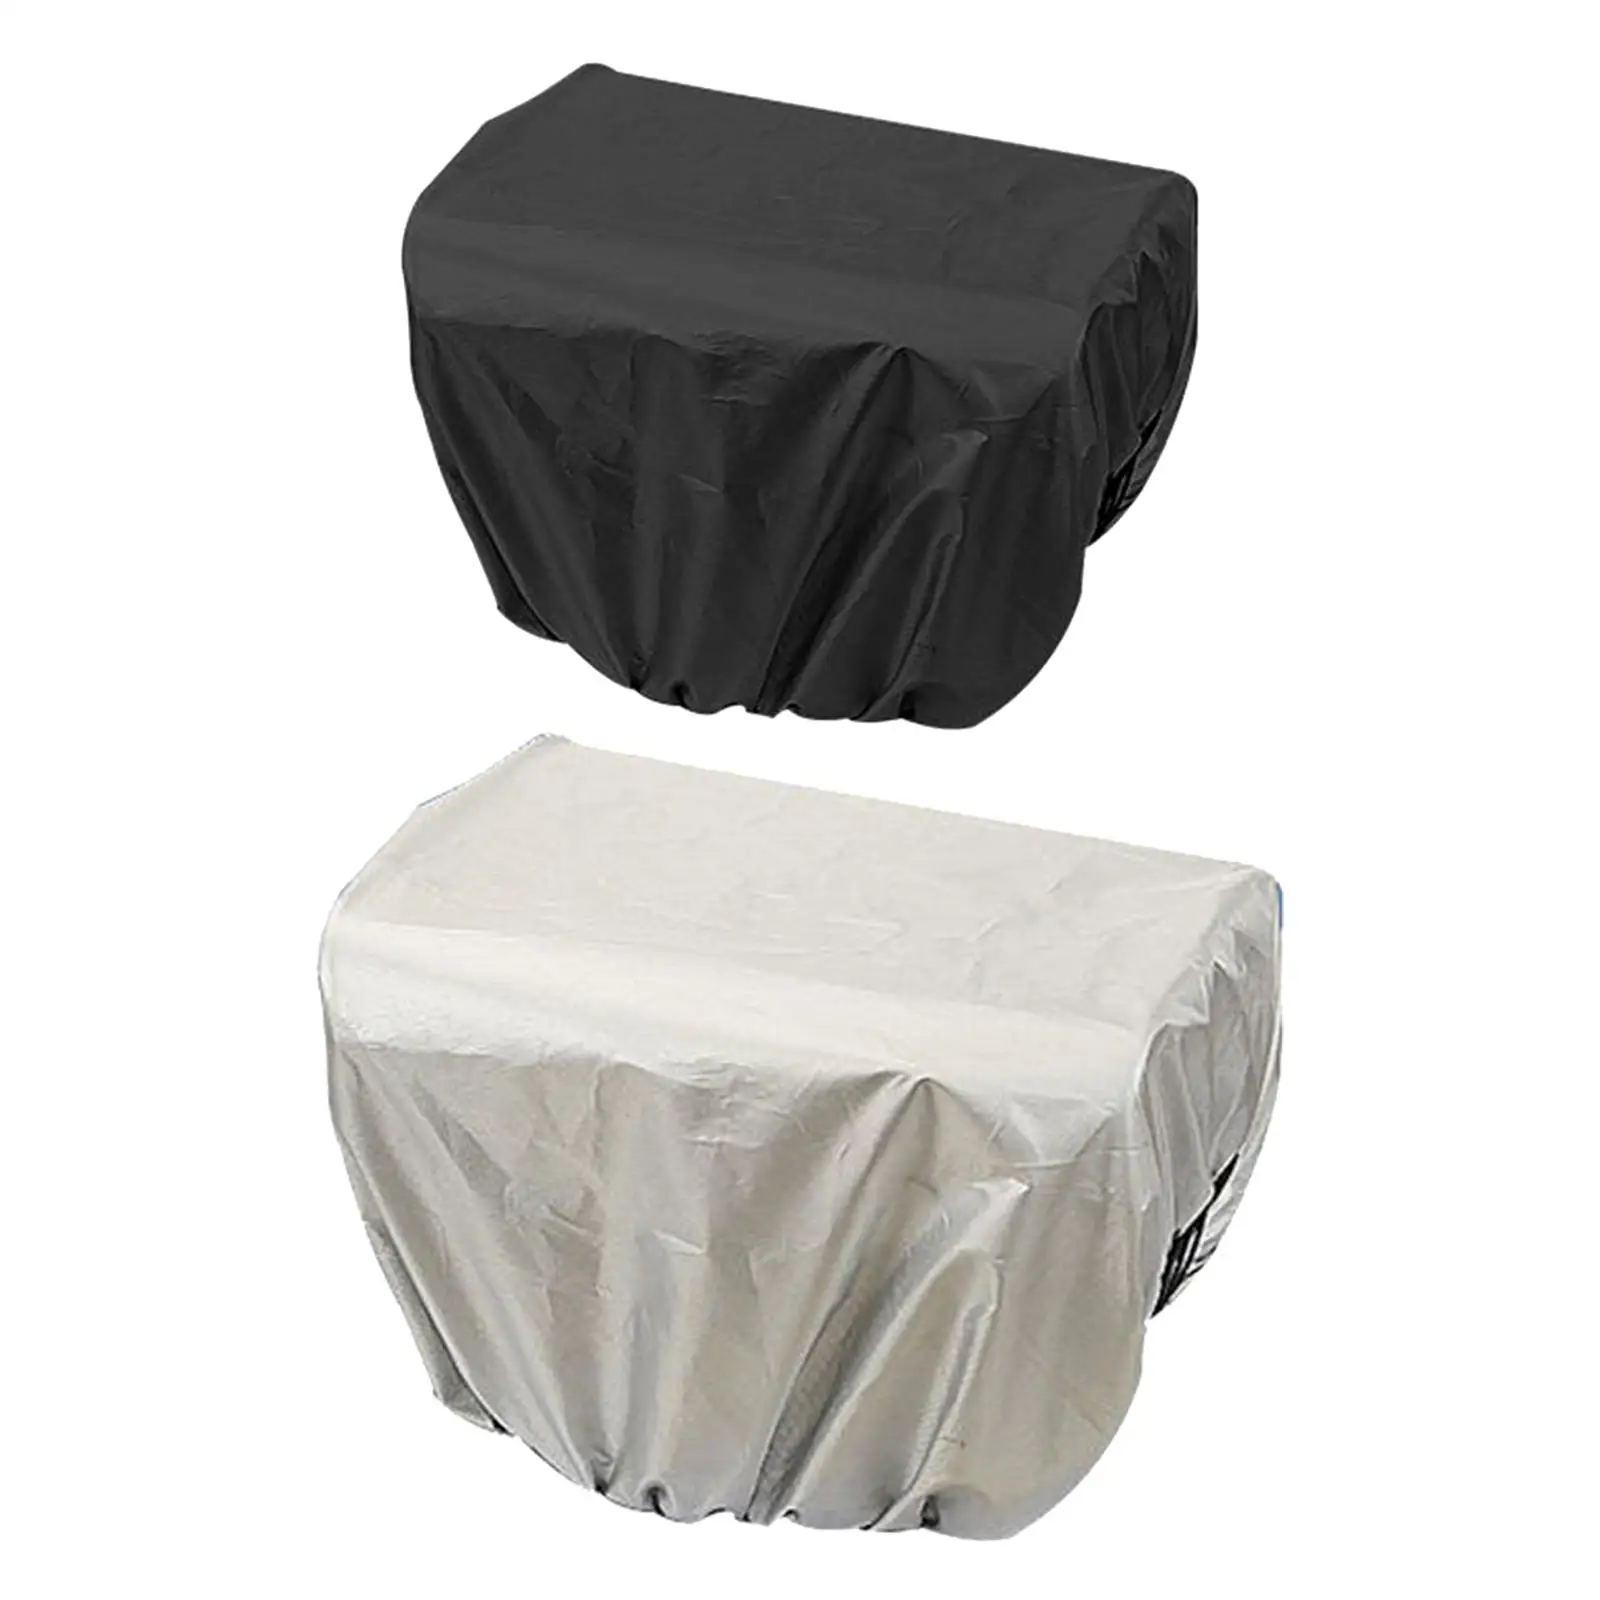 Bike Basket Protective Cover for Tricycles Women Motorcycles